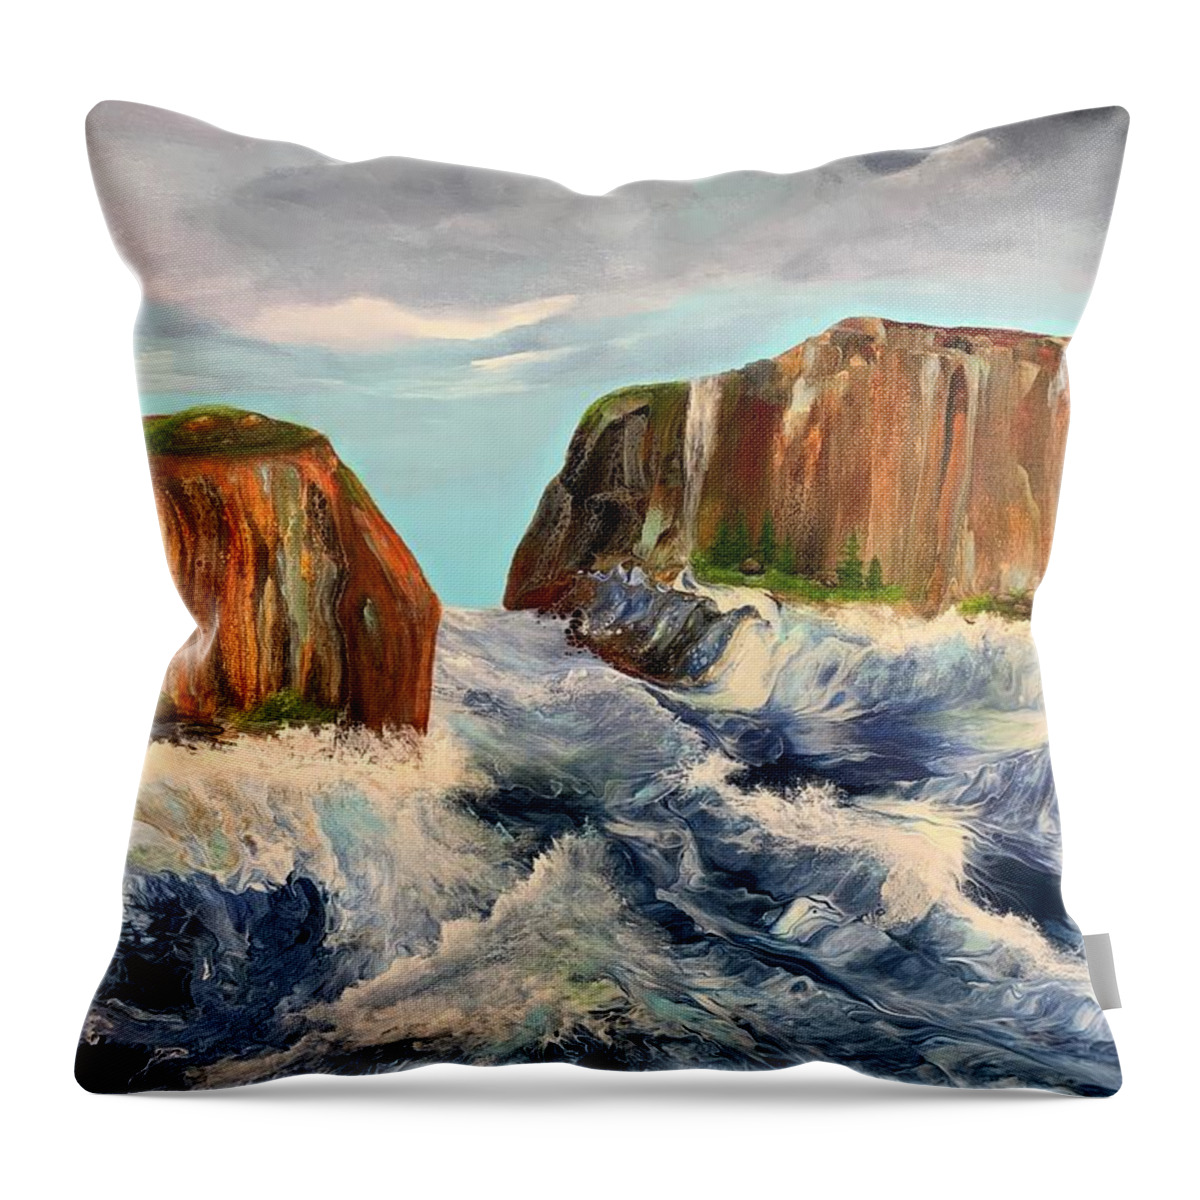 Landscape Throw Pillow featuring the painting Force by Soraya Silvestri